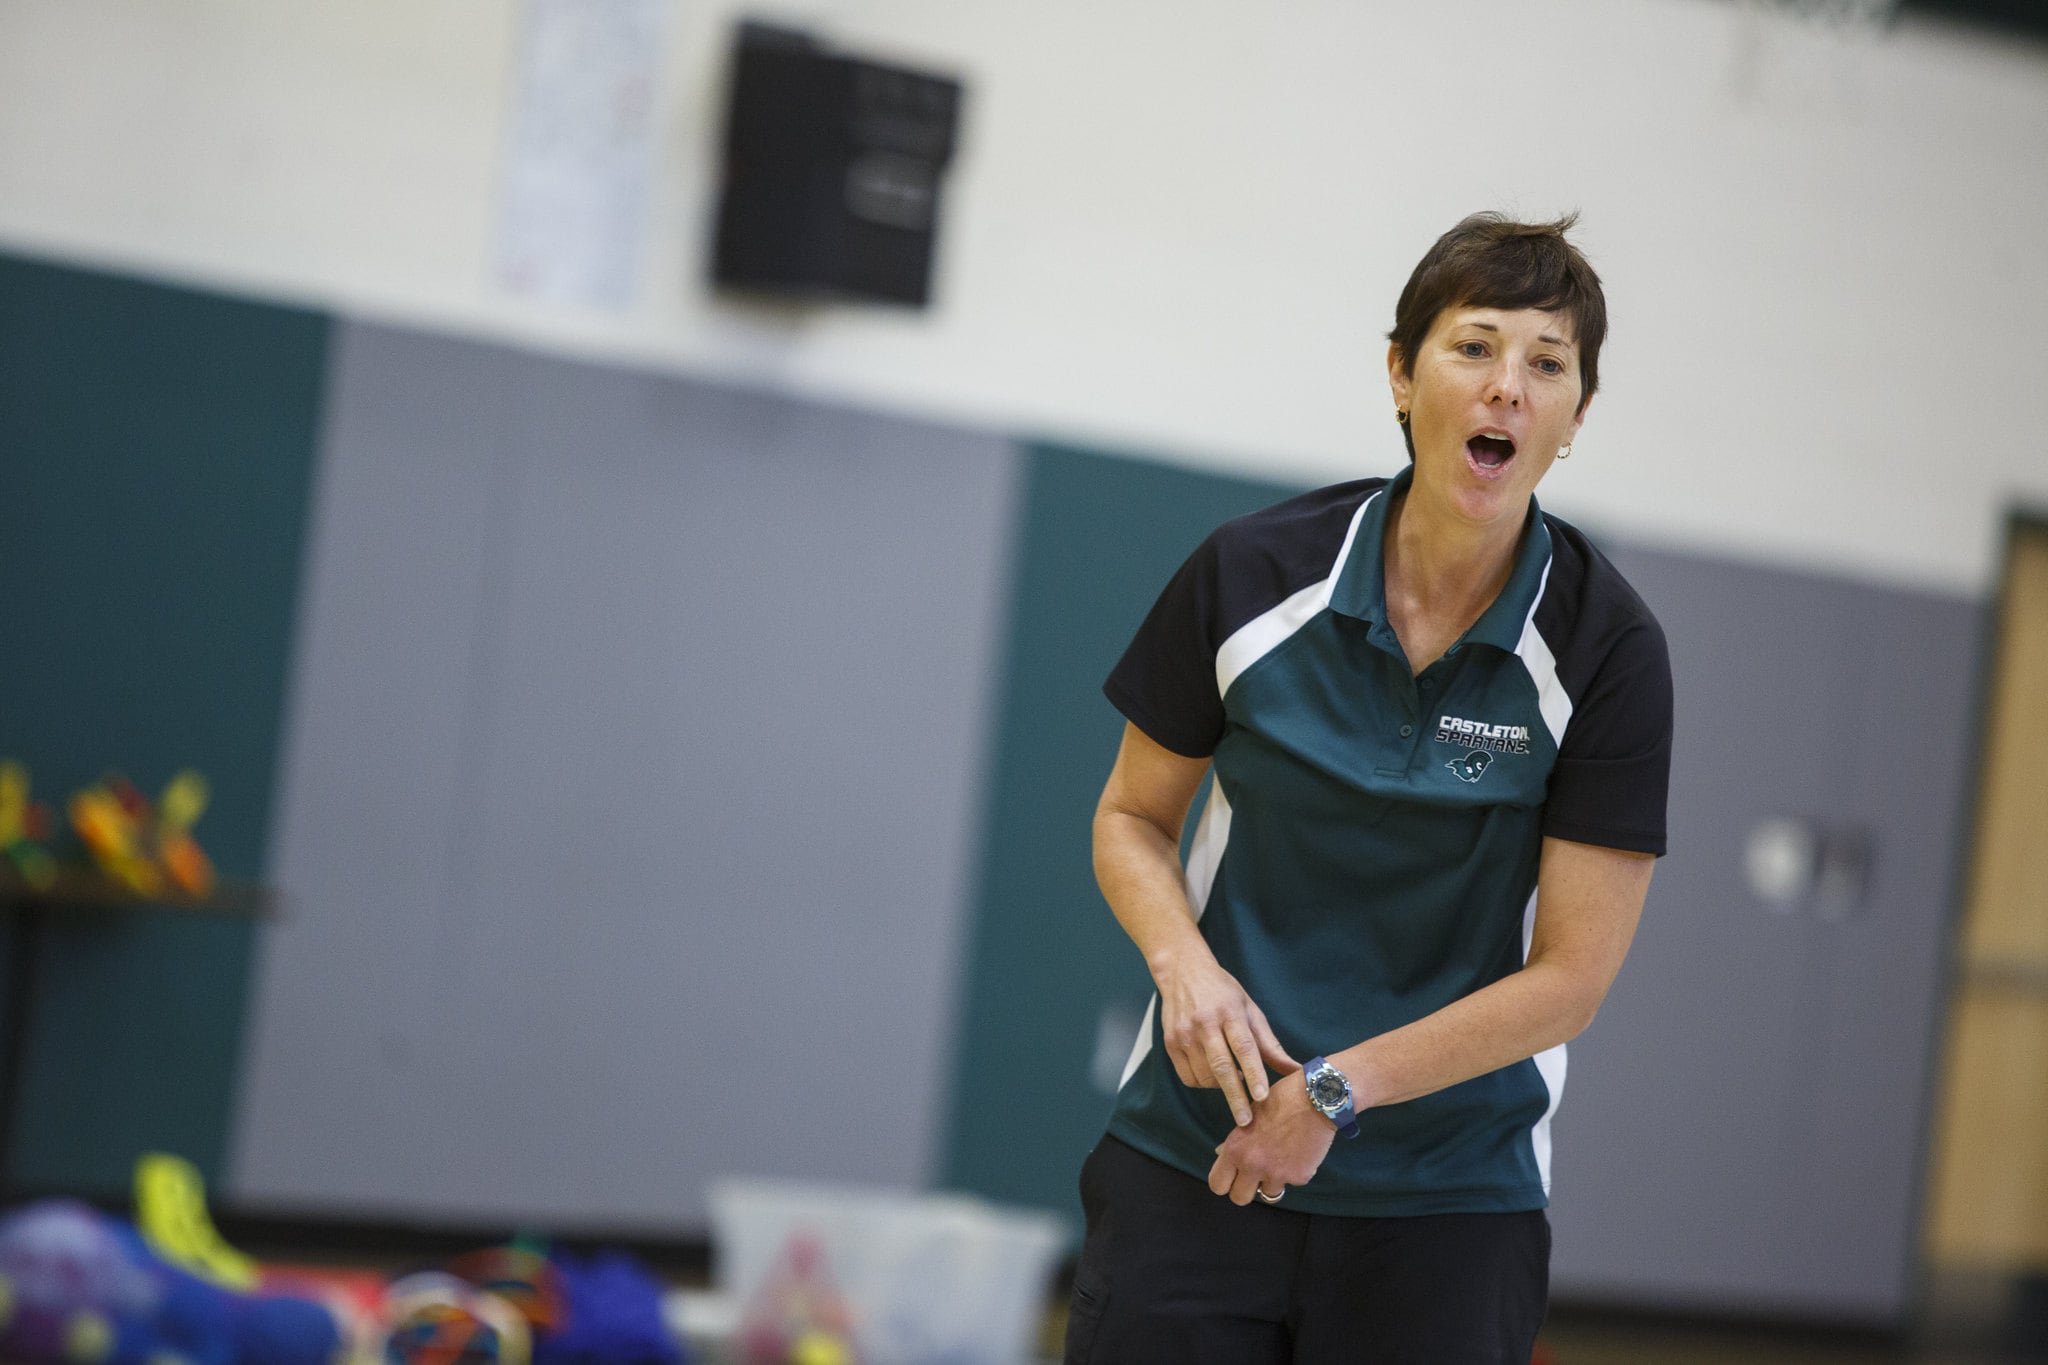 A woman in a green shirt at a Vermont State University gym.